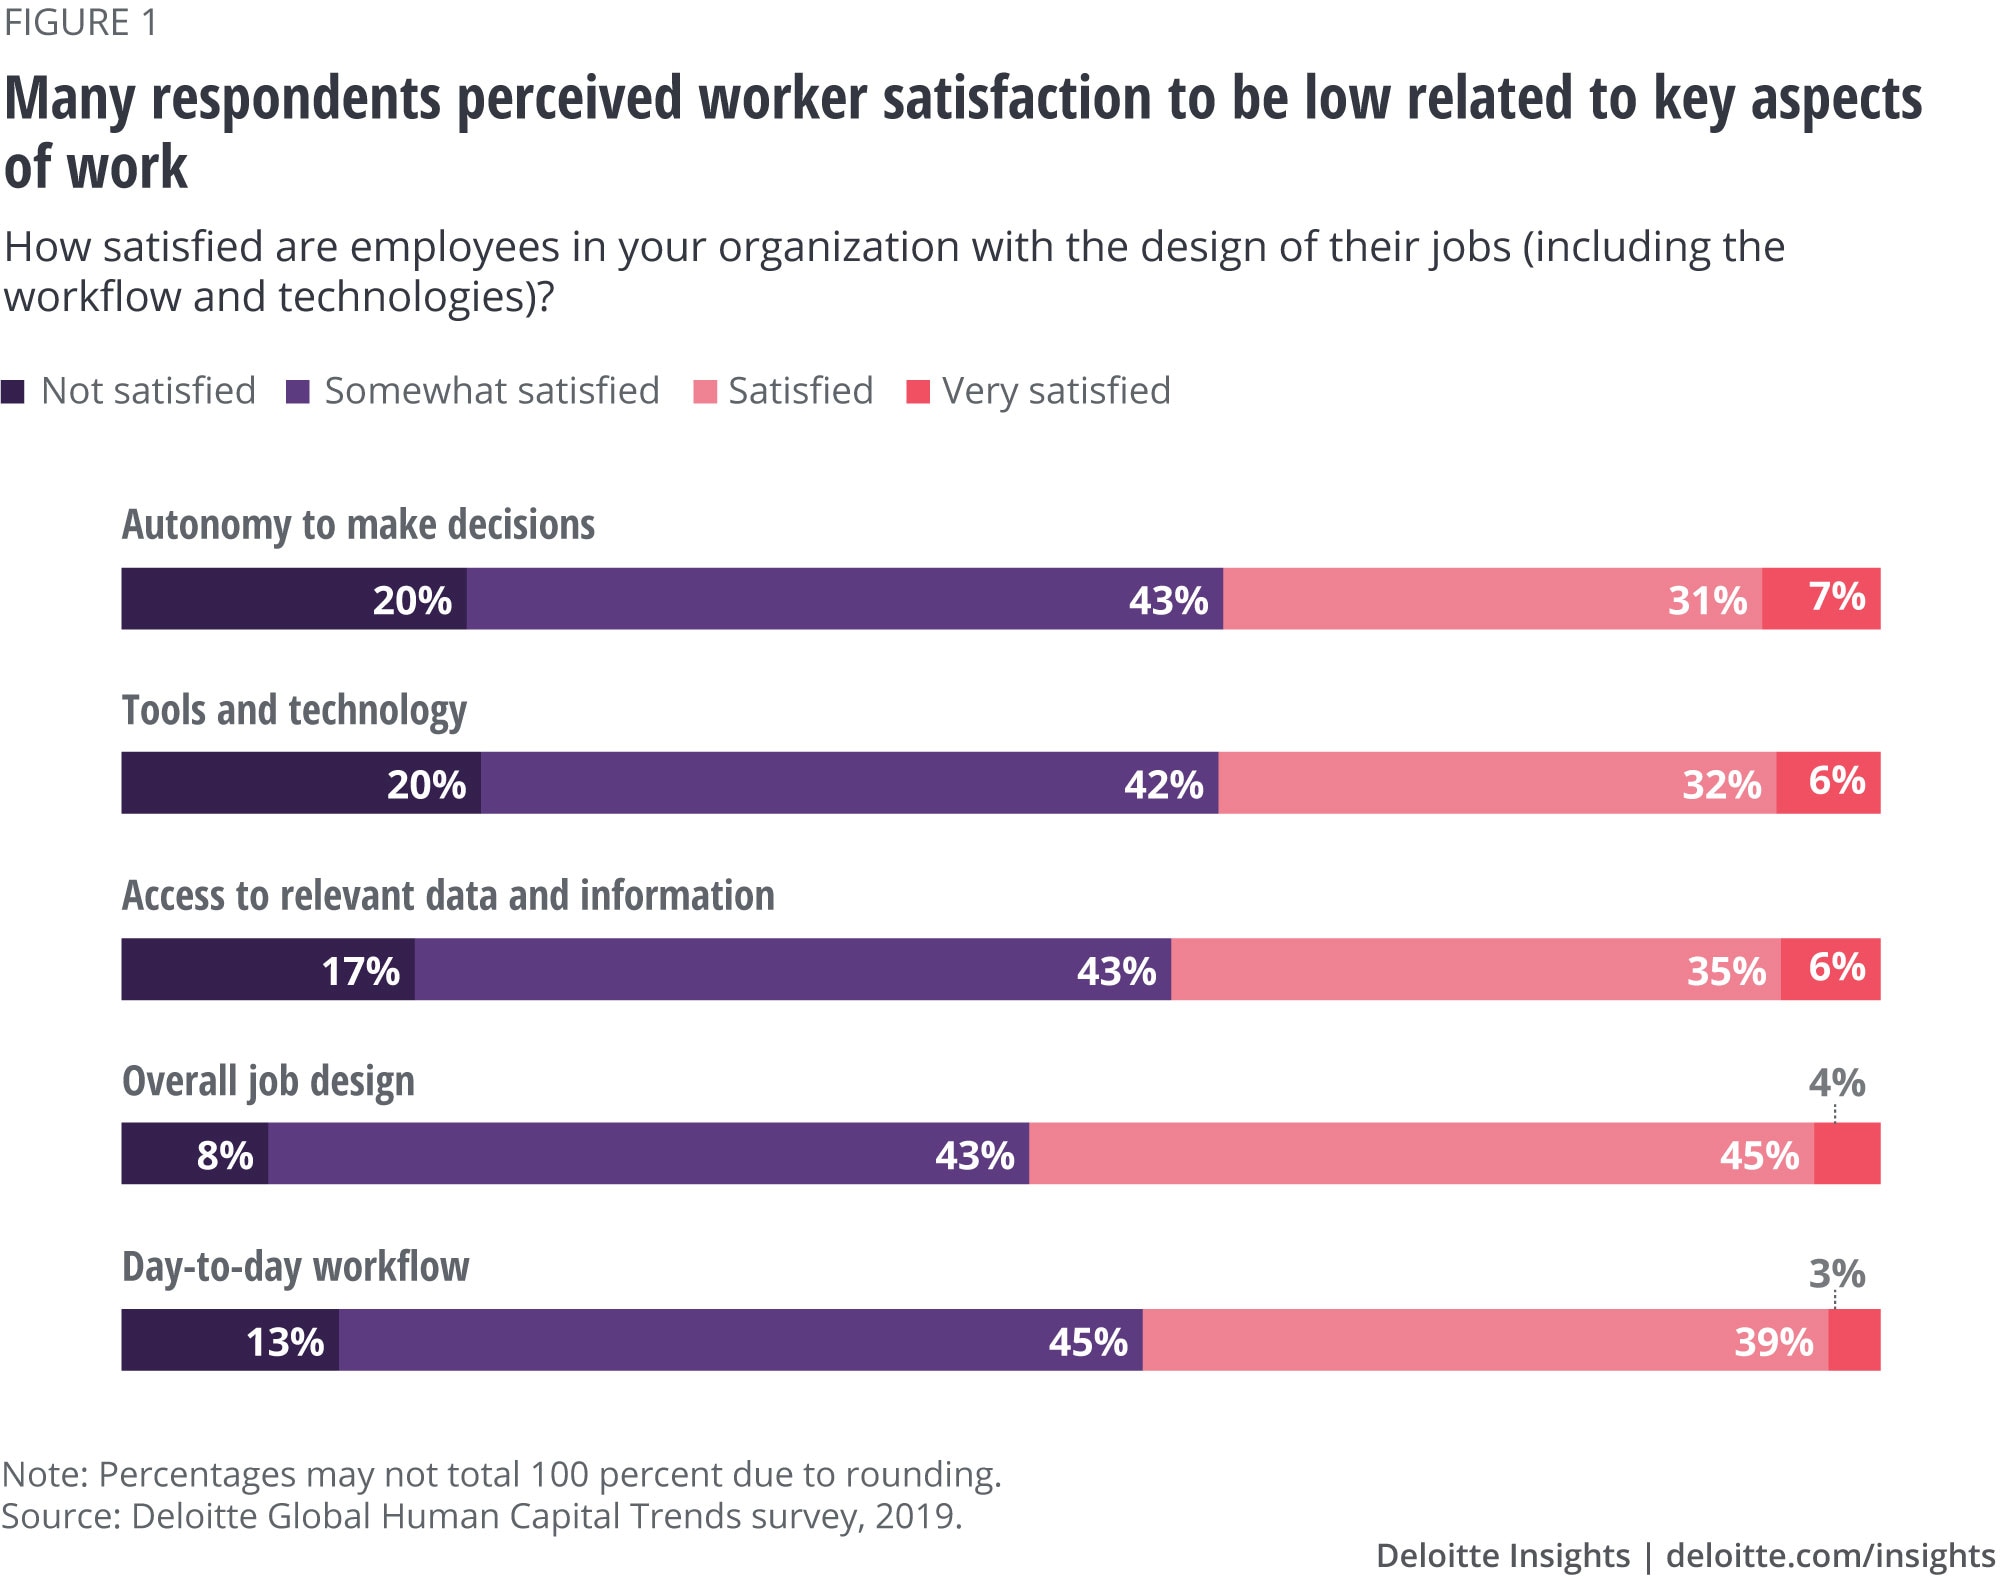 Many respondents perceived worker satisfaction to be low related to key aspects of work